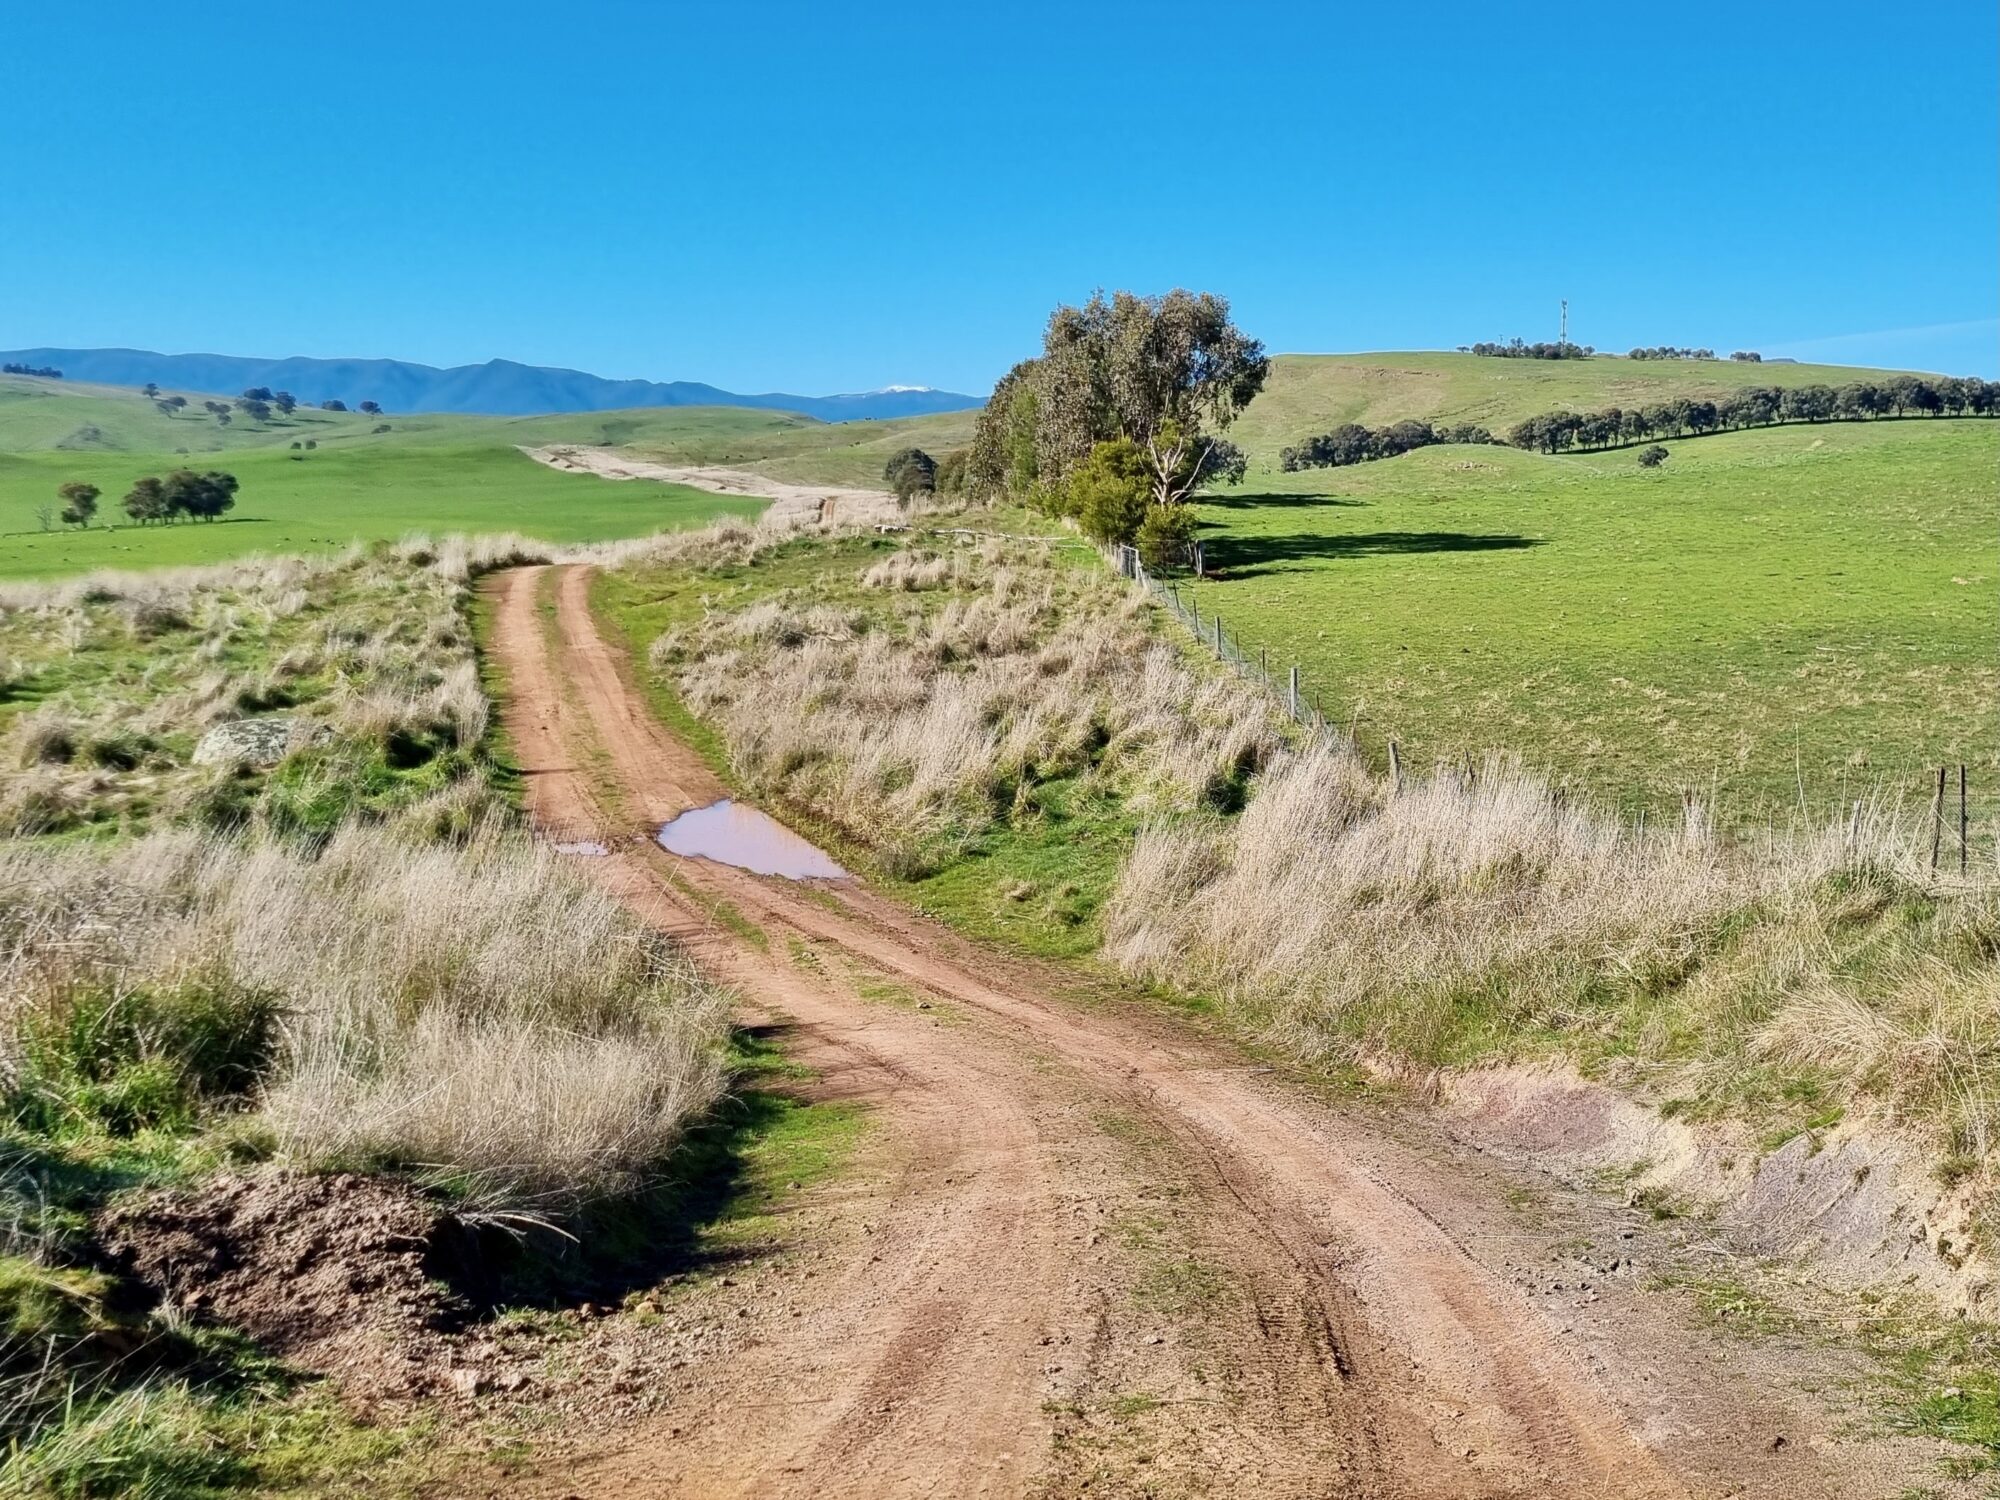 Winding gravel road through green open farmland with snow capped mountain in the background on a sunny day